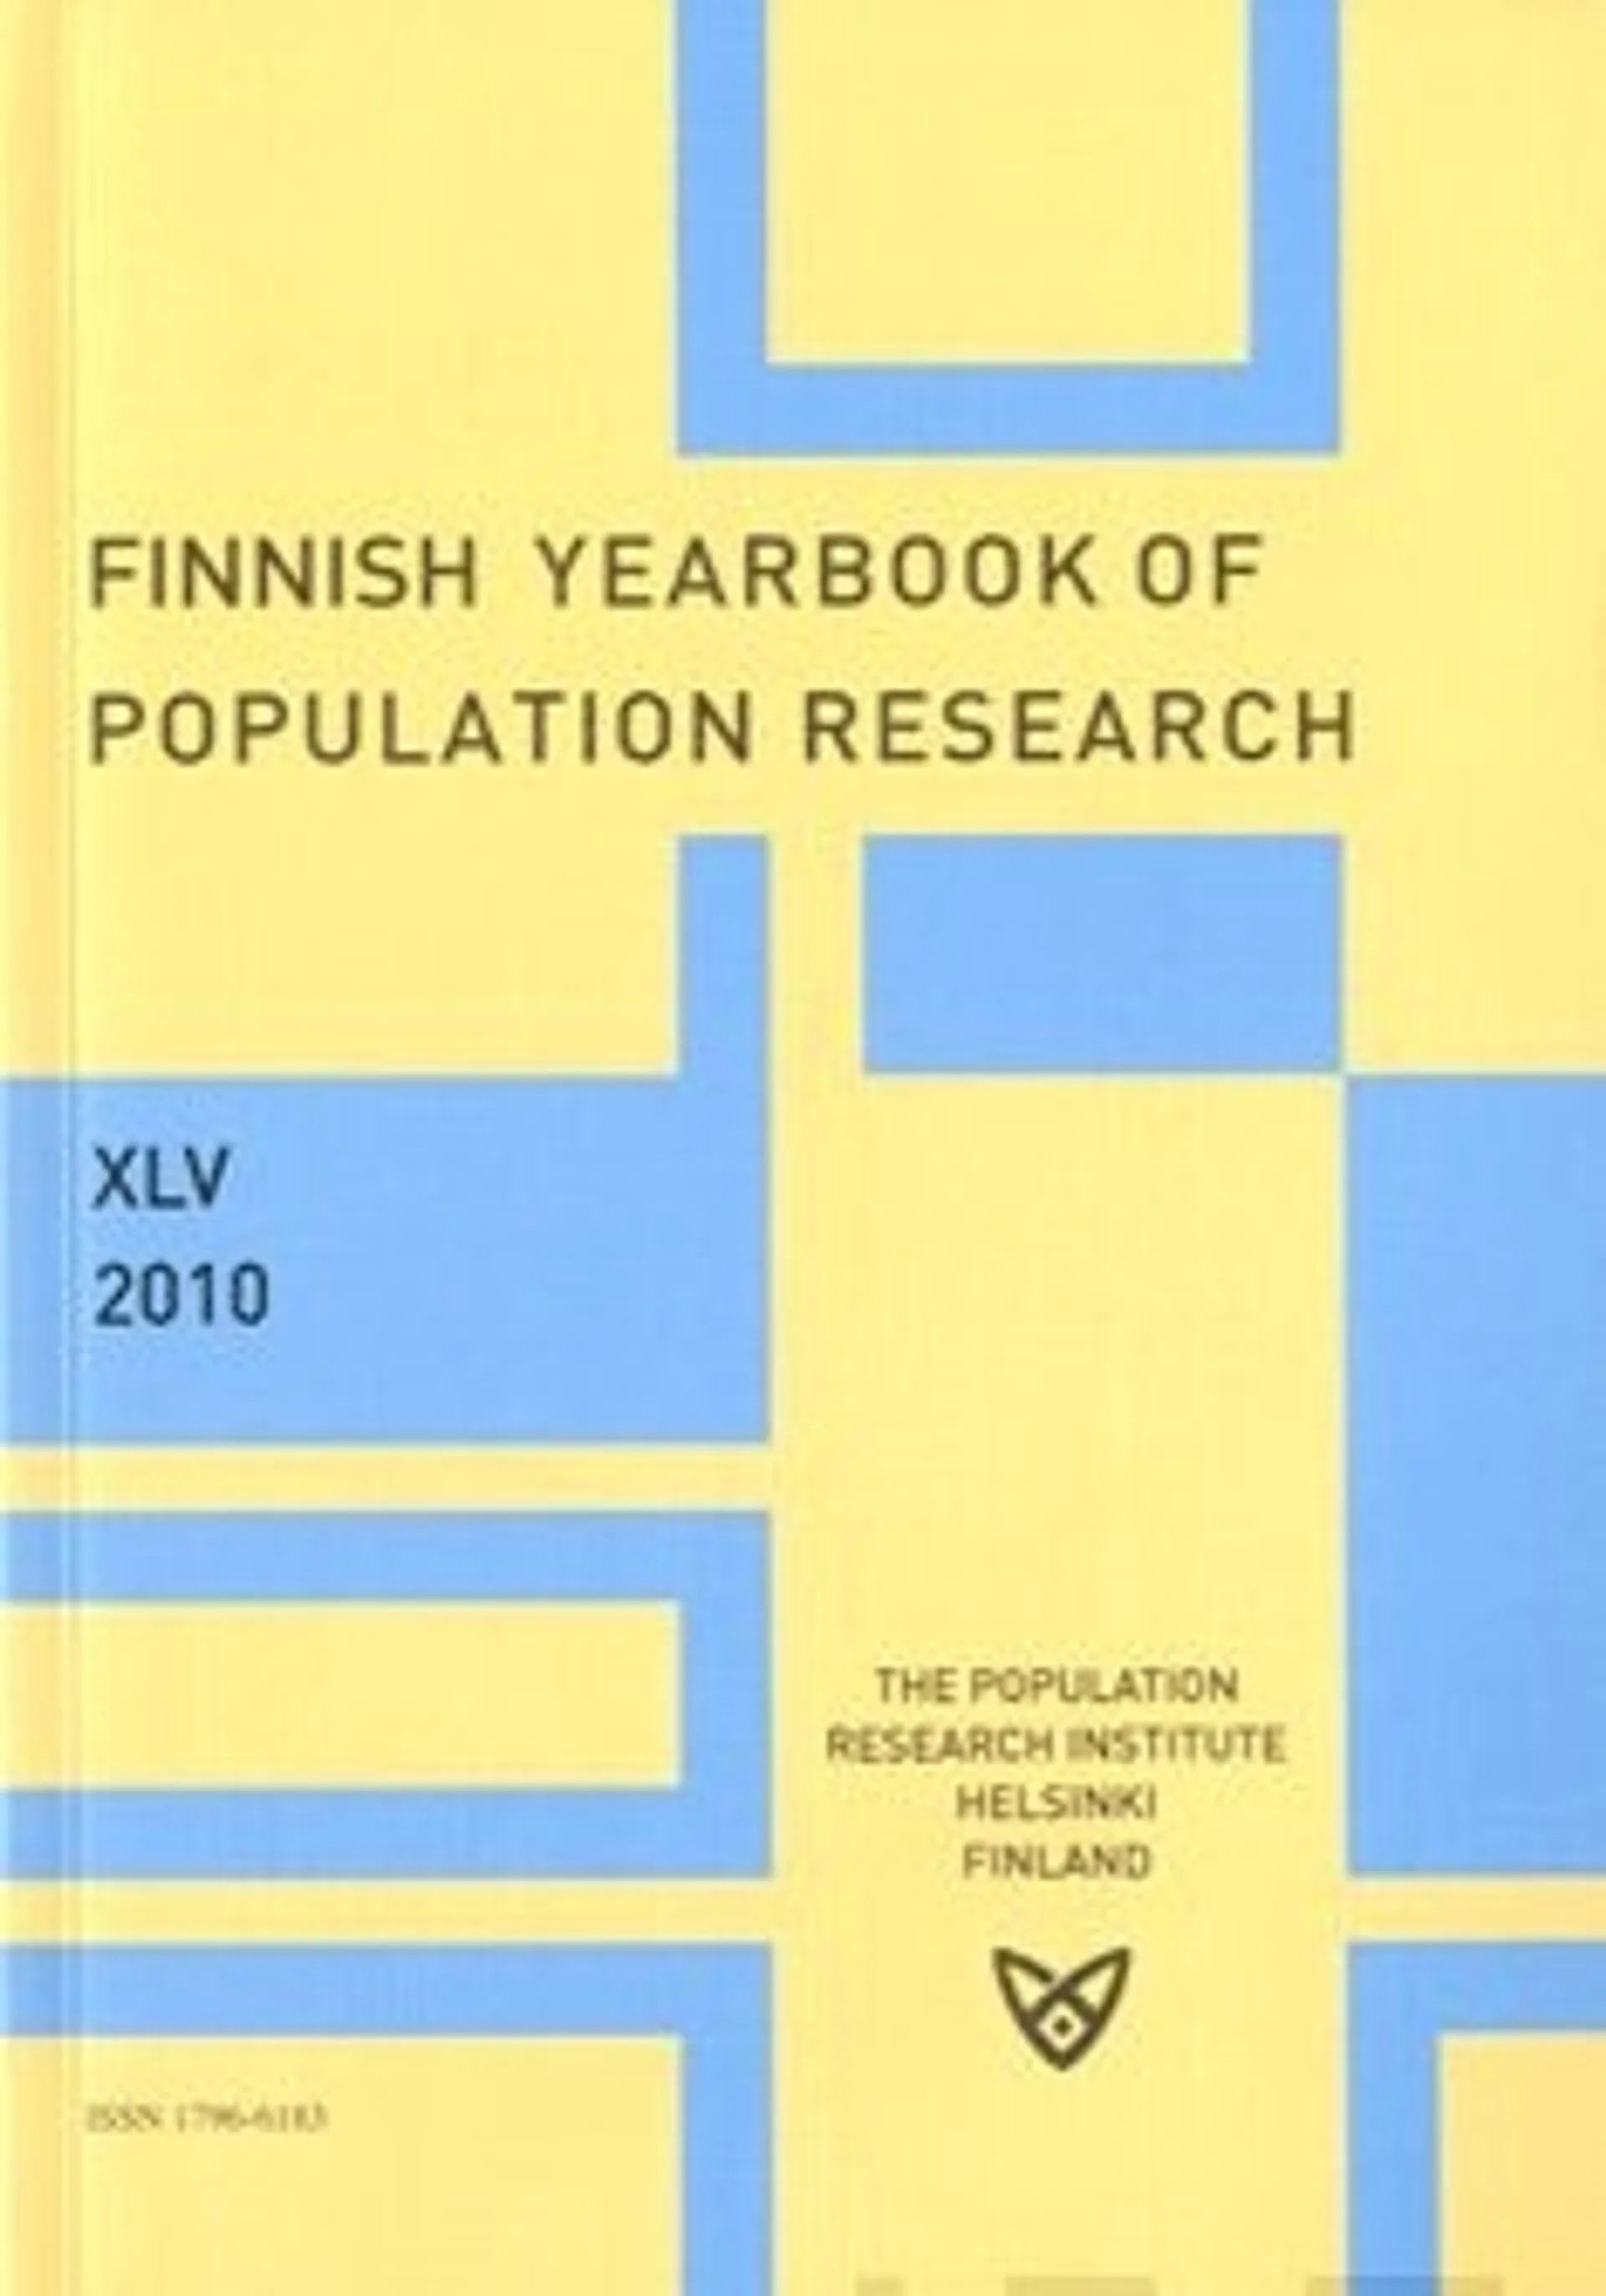 Finnish yearbook of population research XLV 2010